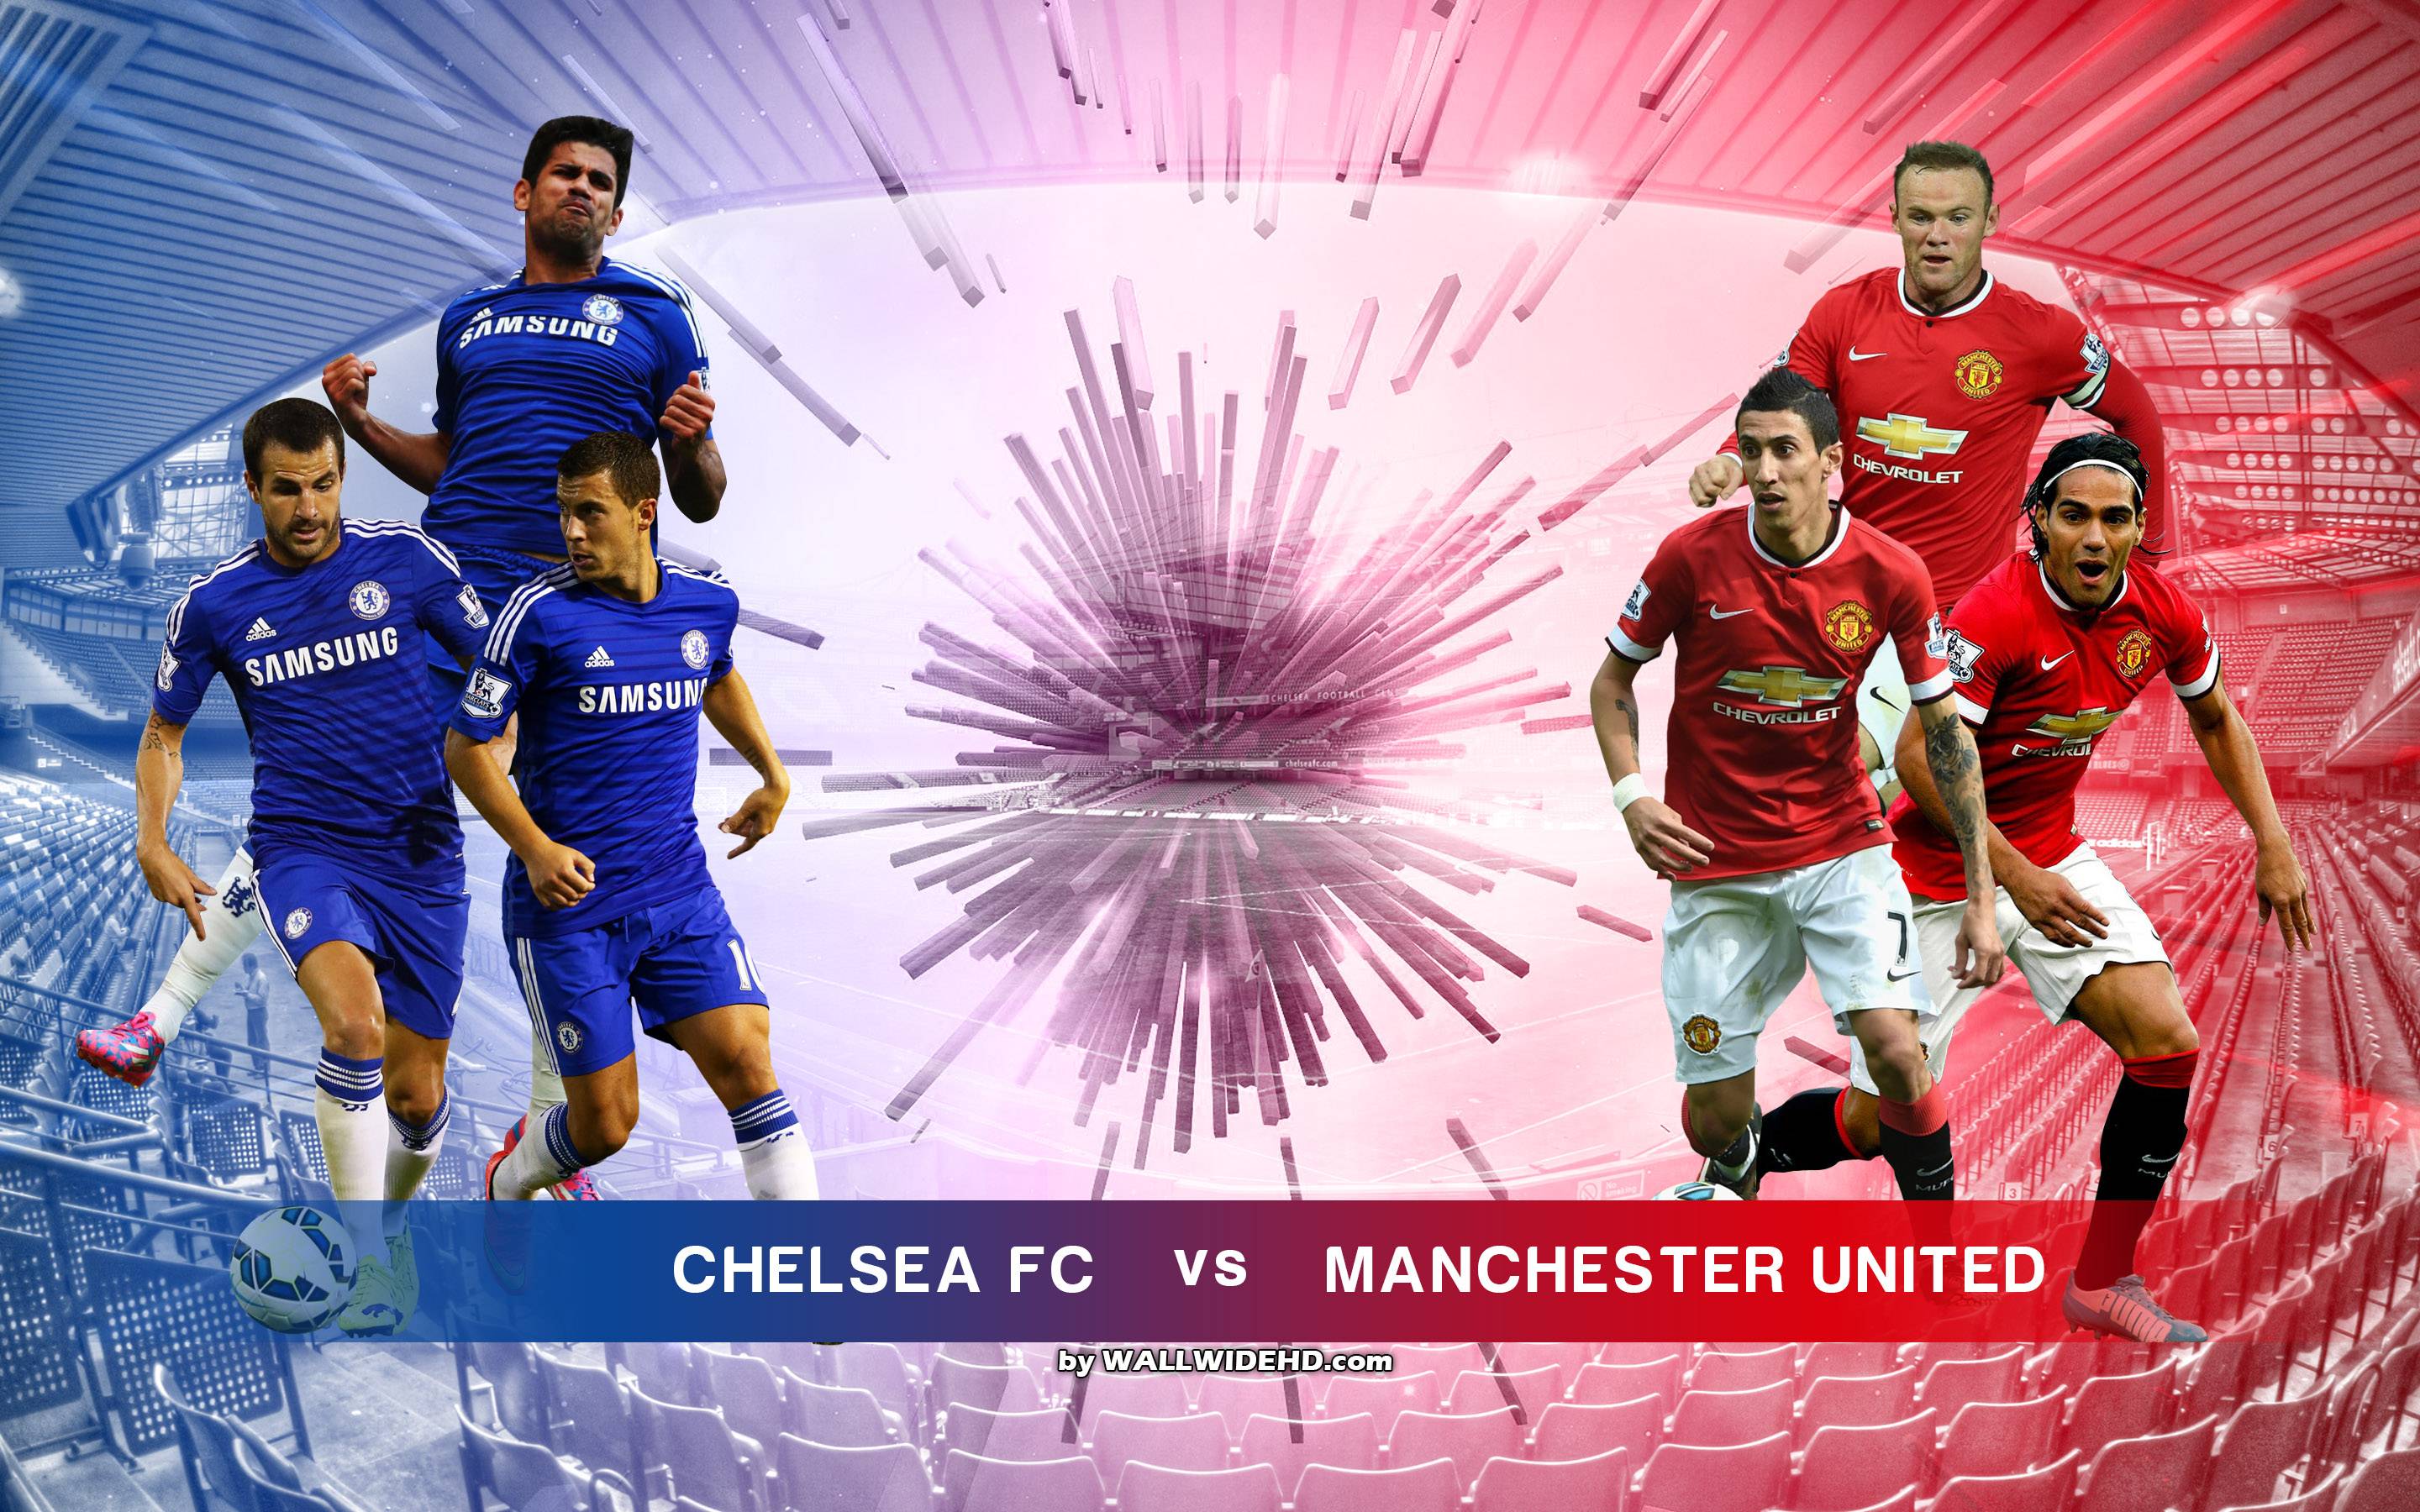 Chelsea FC vs Manchester United 2015 Wallpaper Wide or HD. Sports